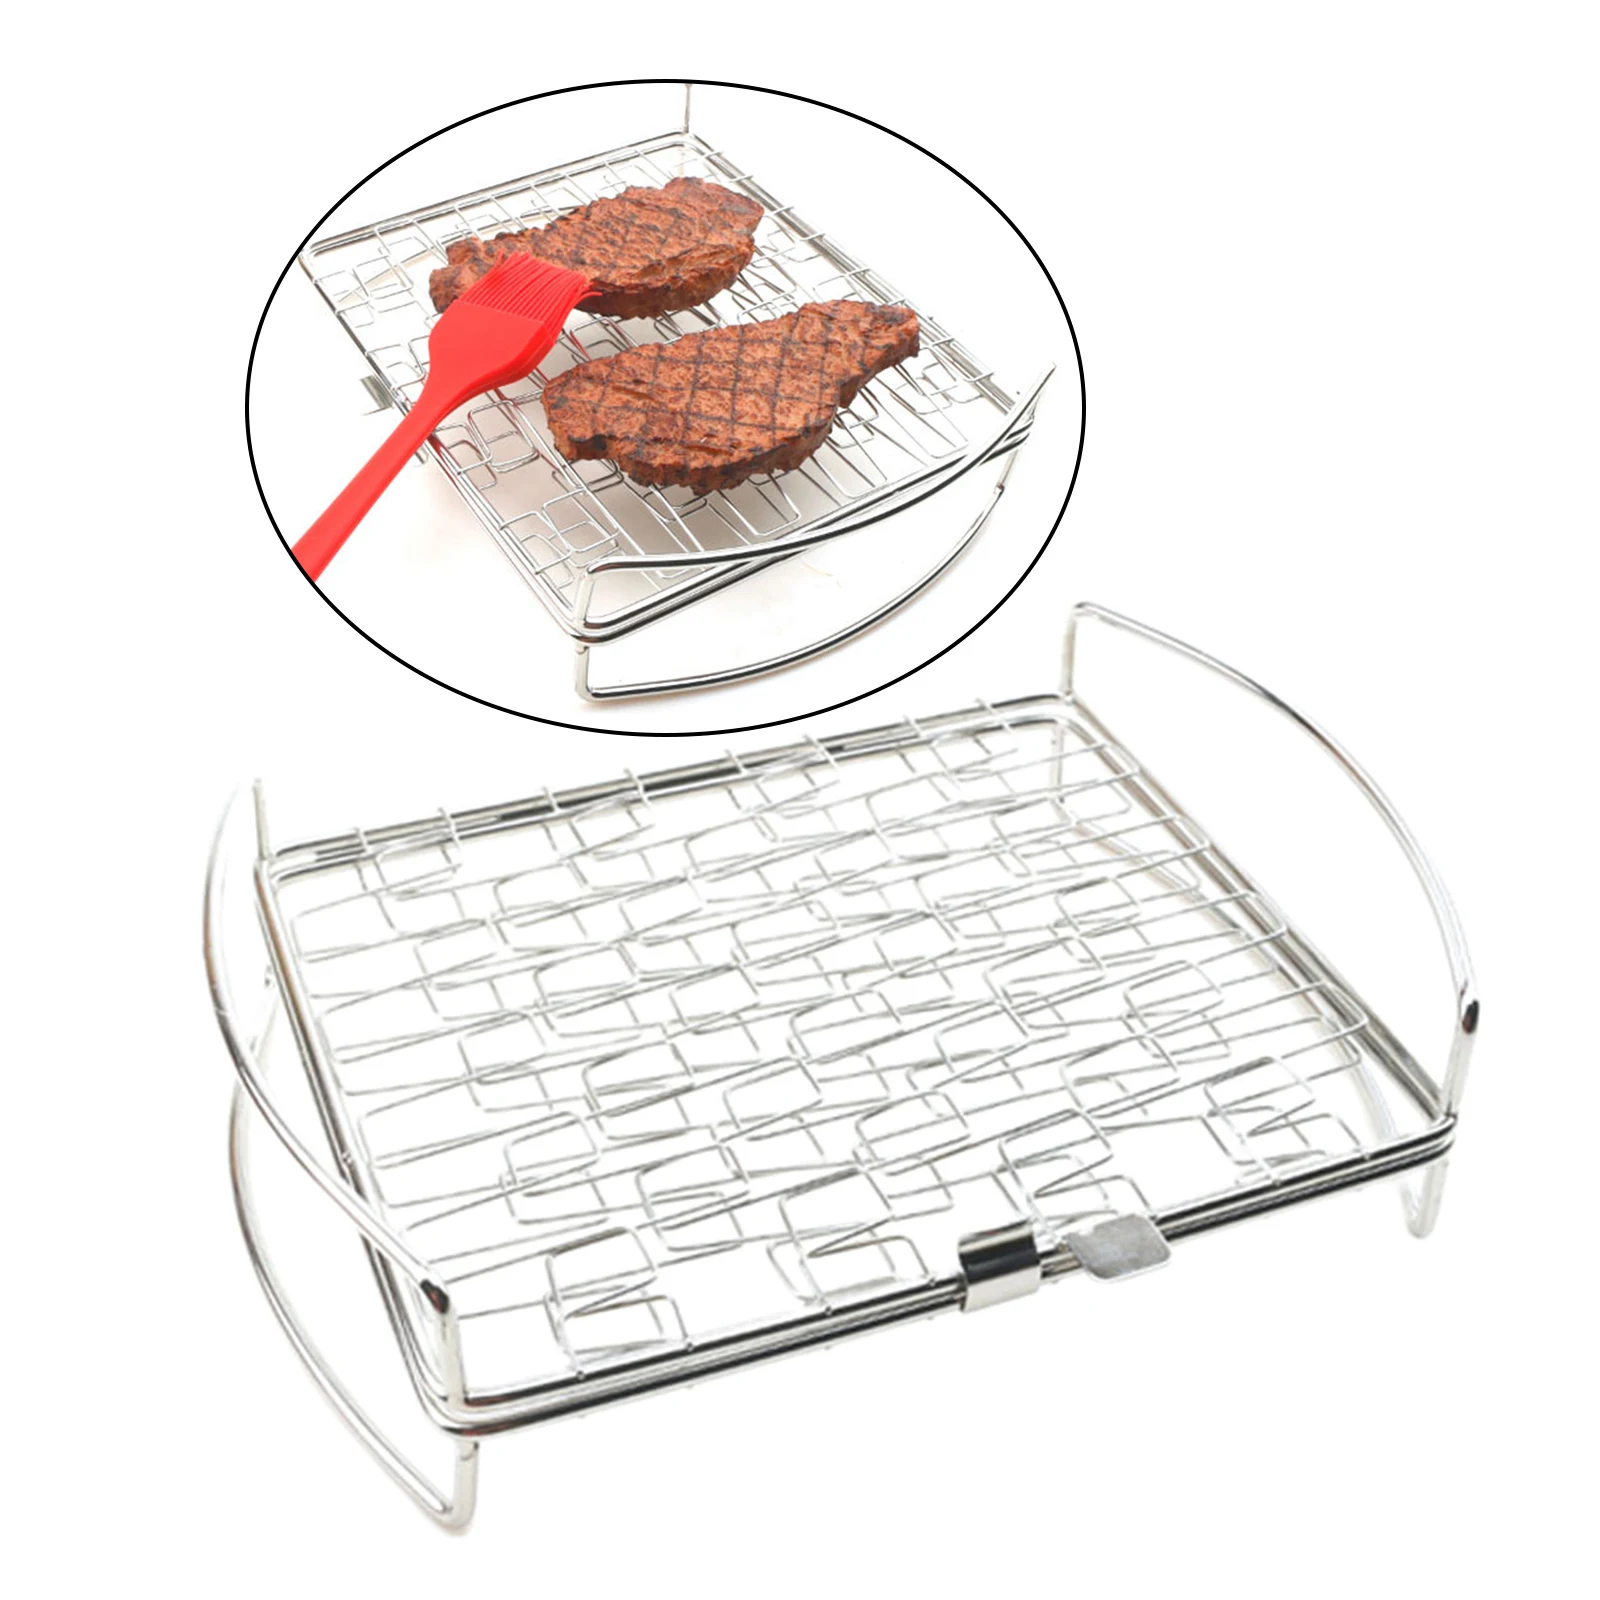 Stainless Steel Grilling Basket Non-stick Folding Grill Net BBQ Net for Grilling Meat Fish Chicken Outdoor Camping Picnic Tool